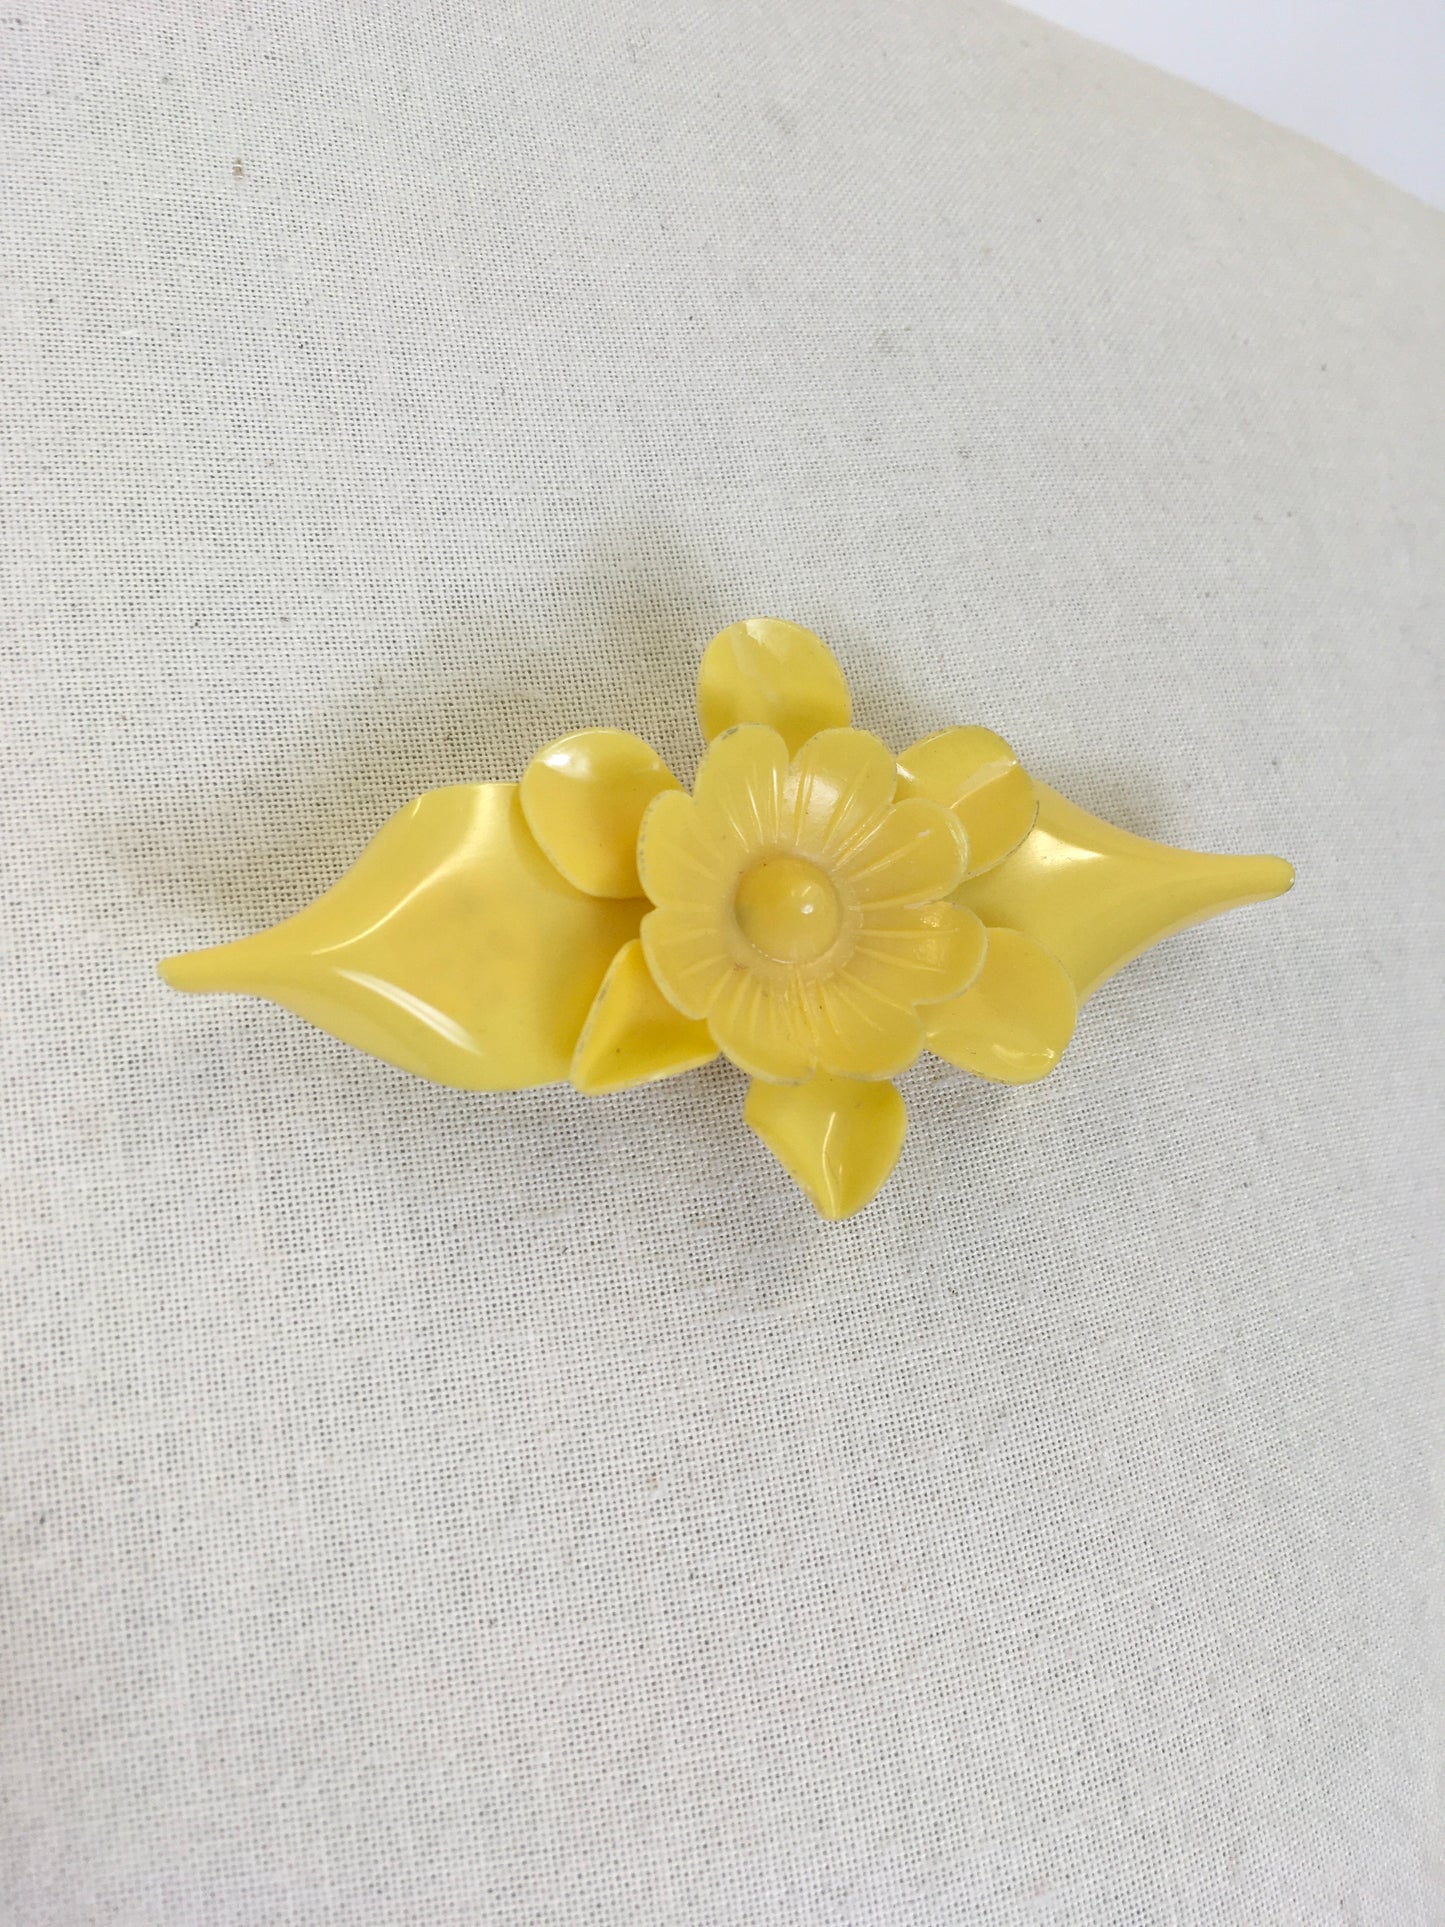 Original Late 1930's Early 1940's Celluloid Flora Brooch - In Primrose Yellow